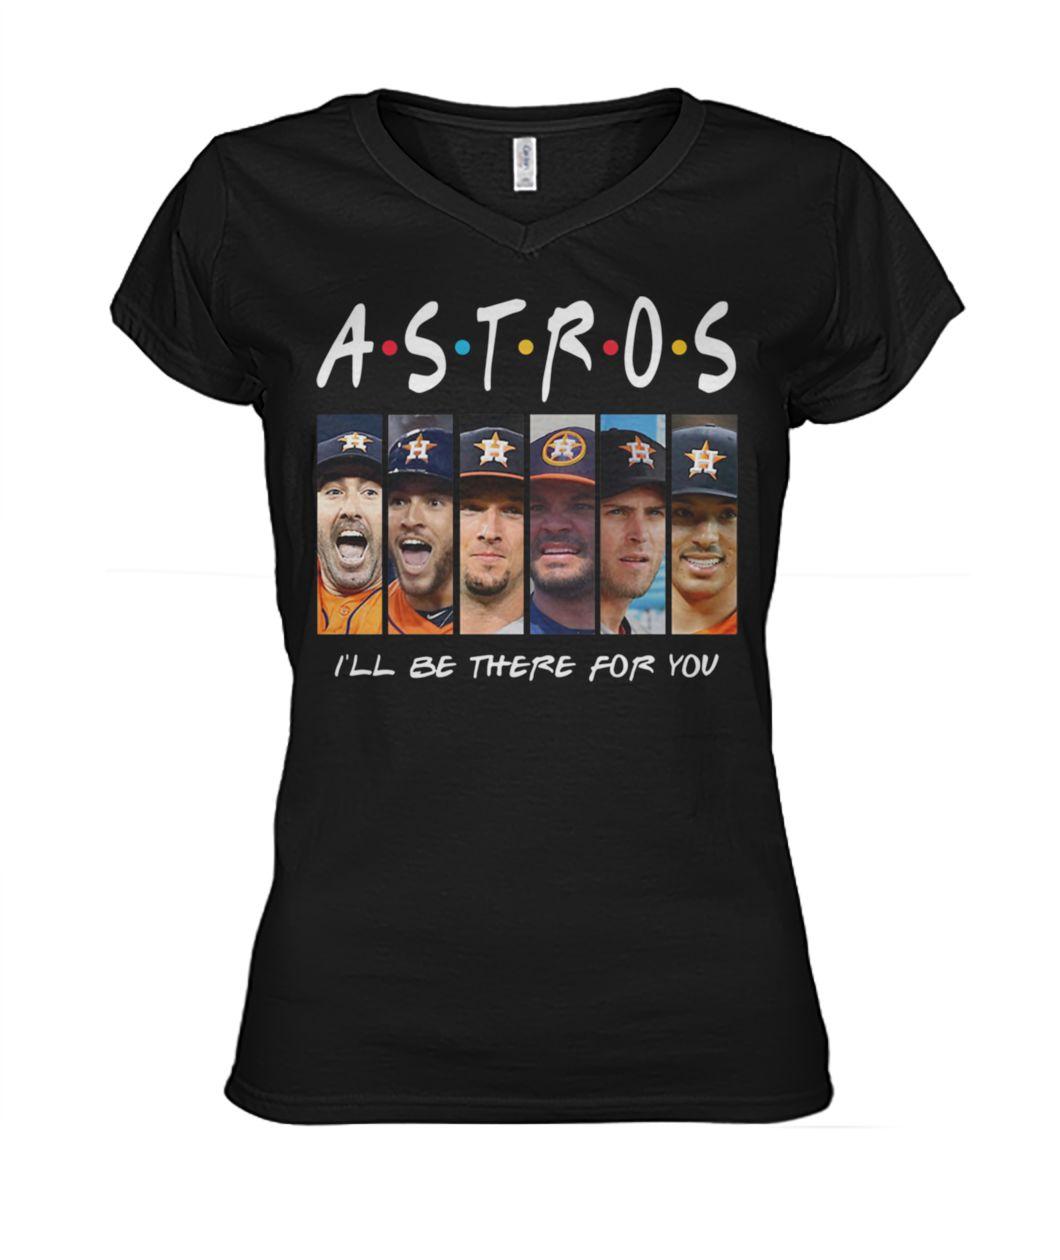 Friends tv show houston astros I’ll be there for you womens v-neck